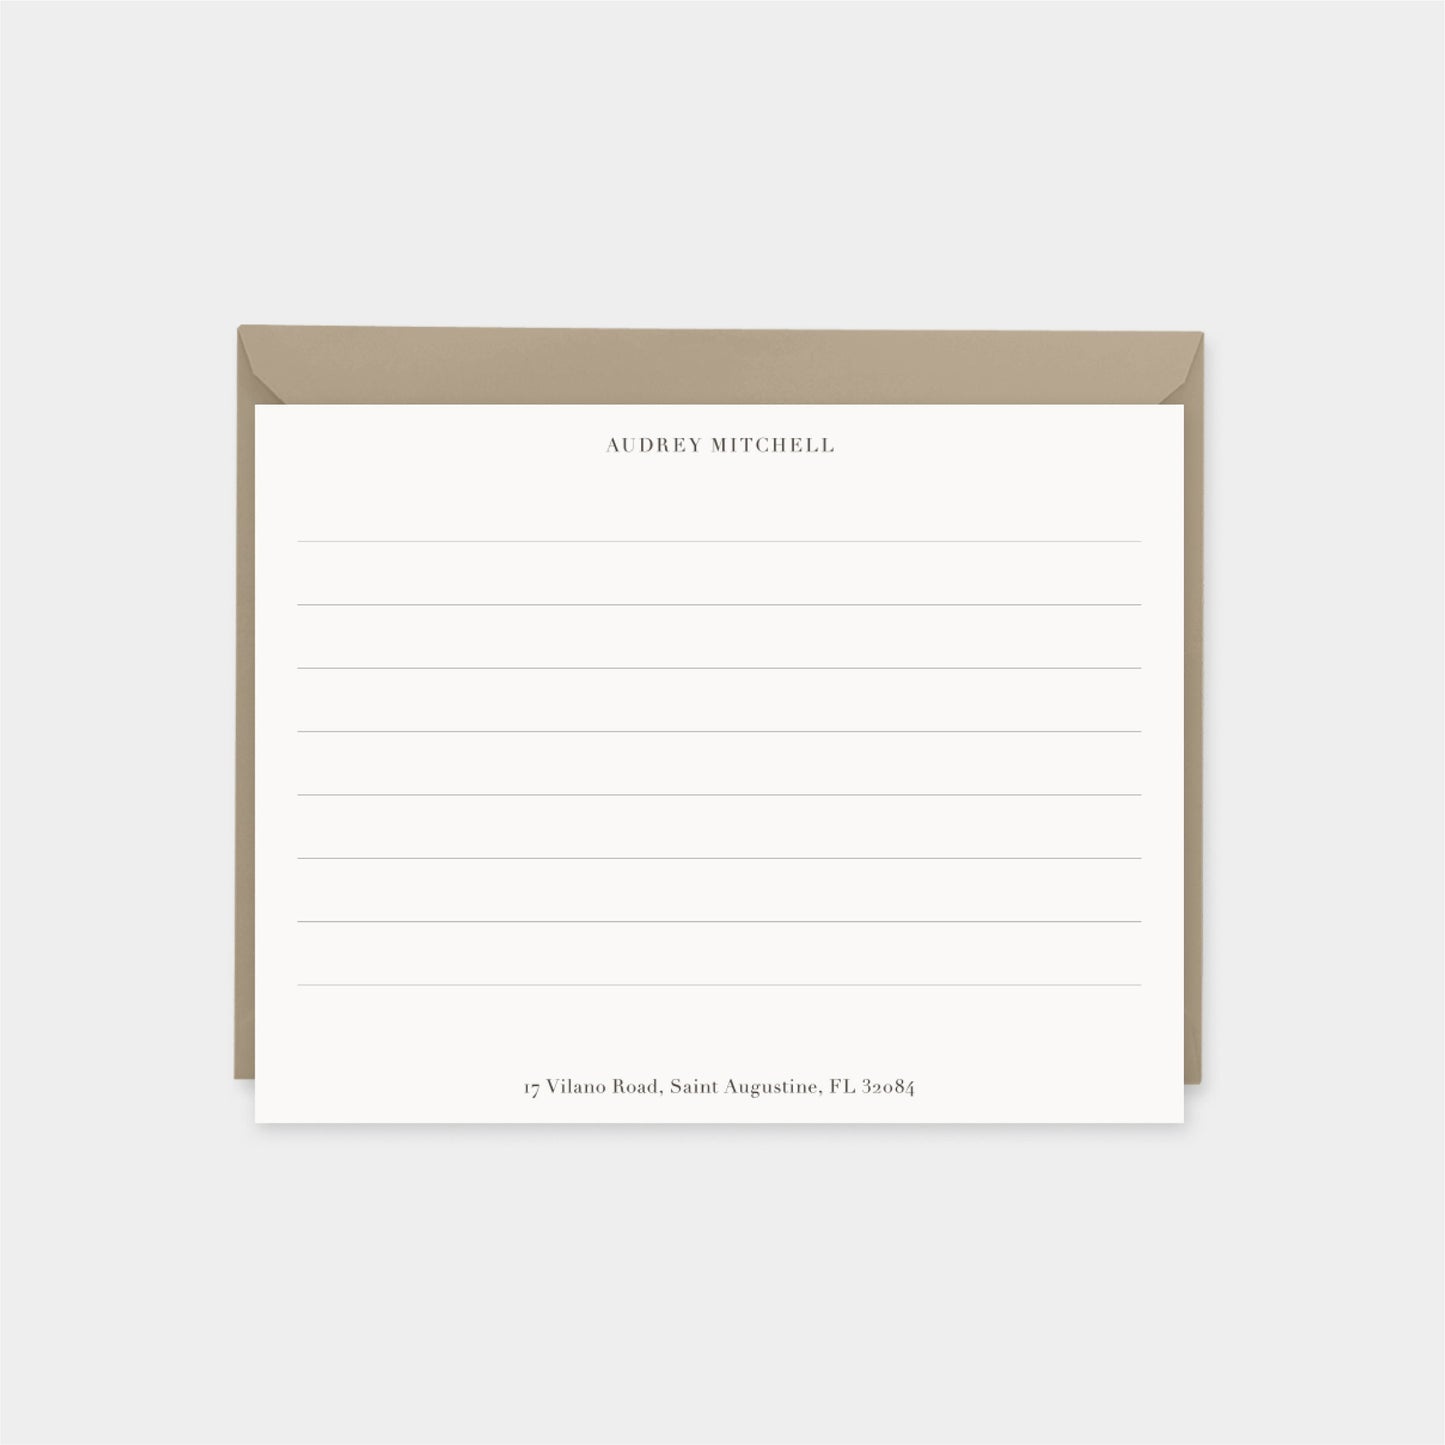 Steel Painted Texture Note Cards,